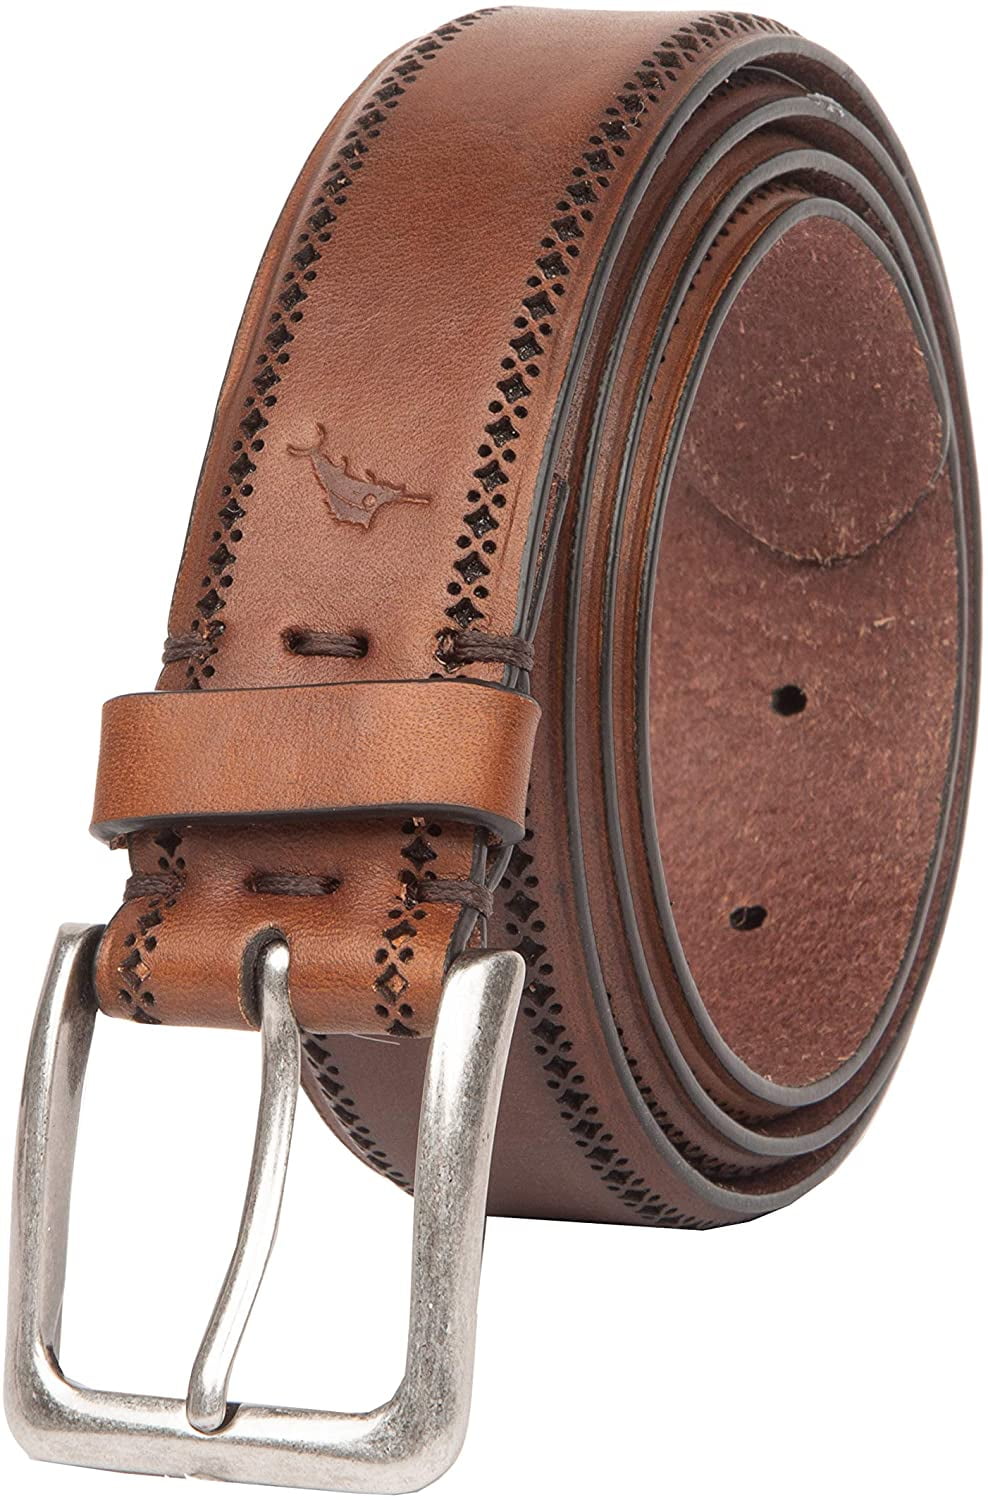 Tommy Bahama Men's 100% Leather Belt, Brown, Extra Large (42-44 ...